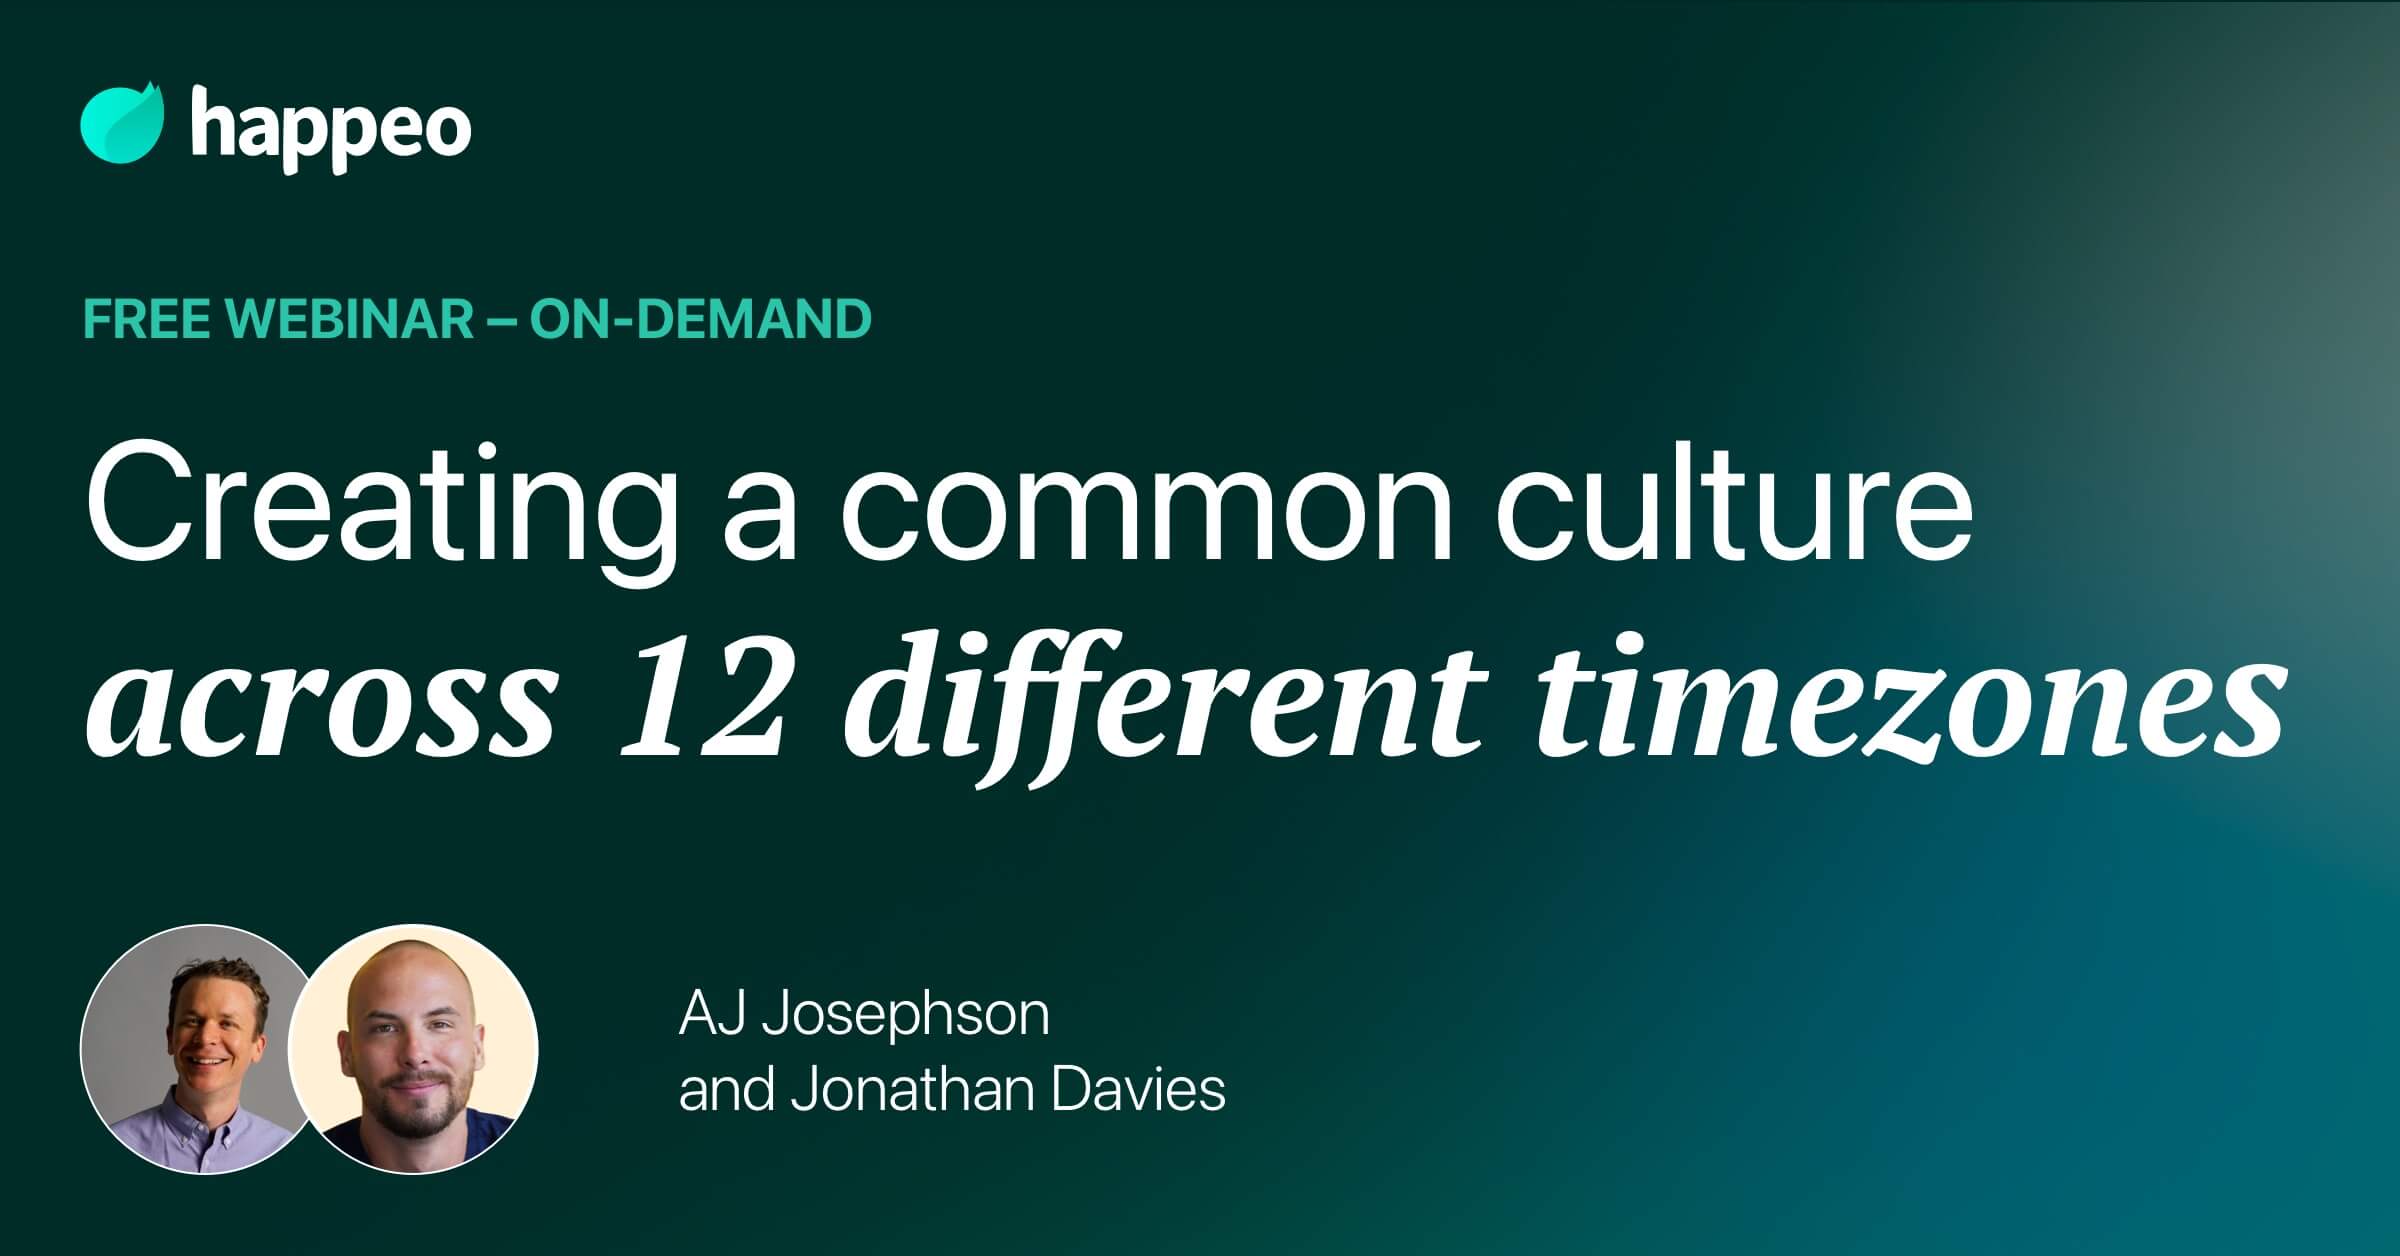 Creating a common culture across 12 different timezones